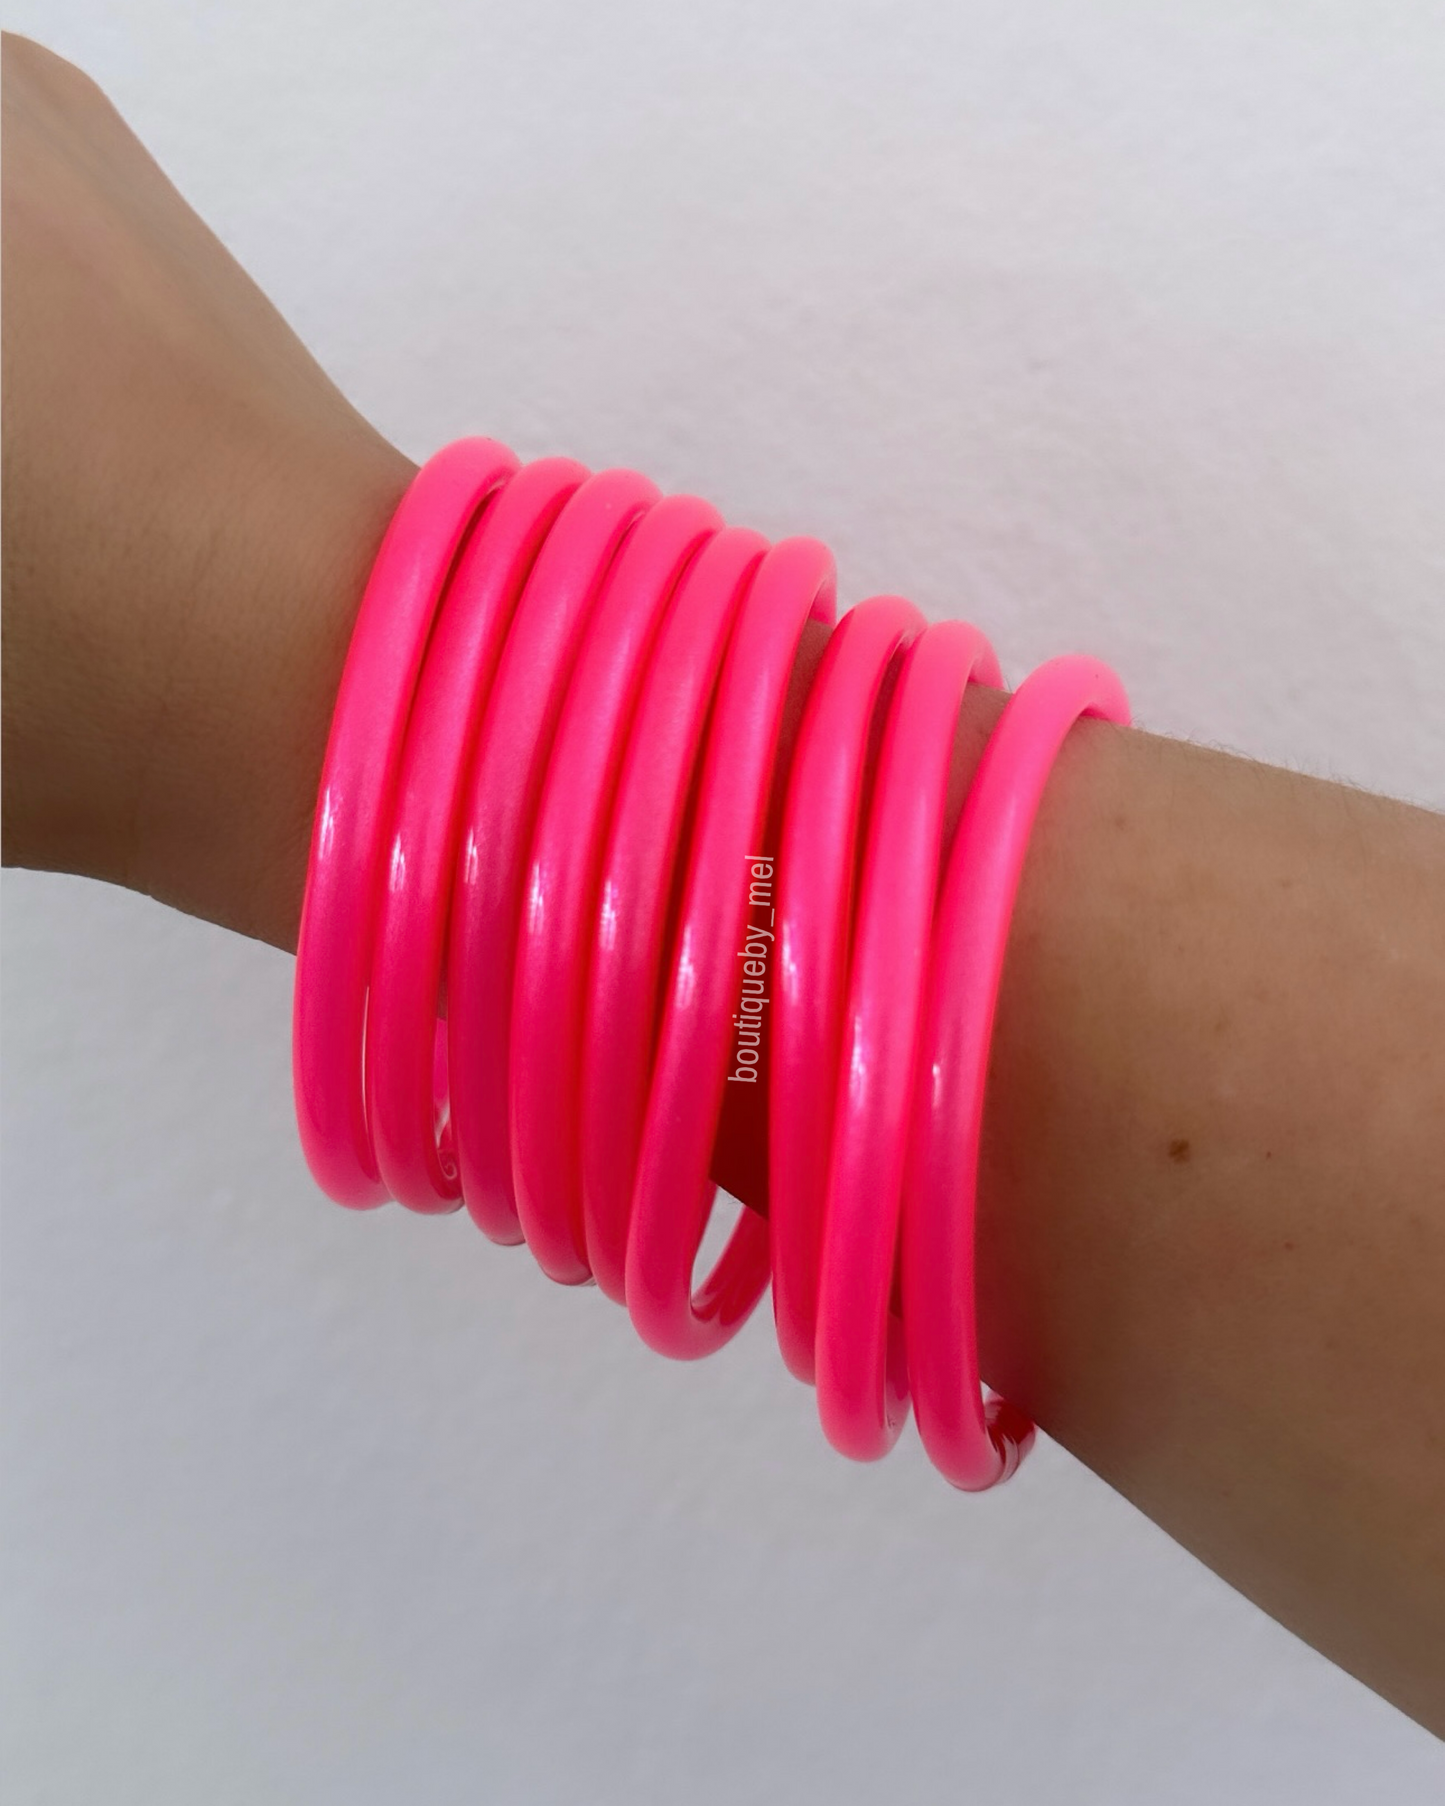 Hot Pink Jelly Bangles (set of 9)